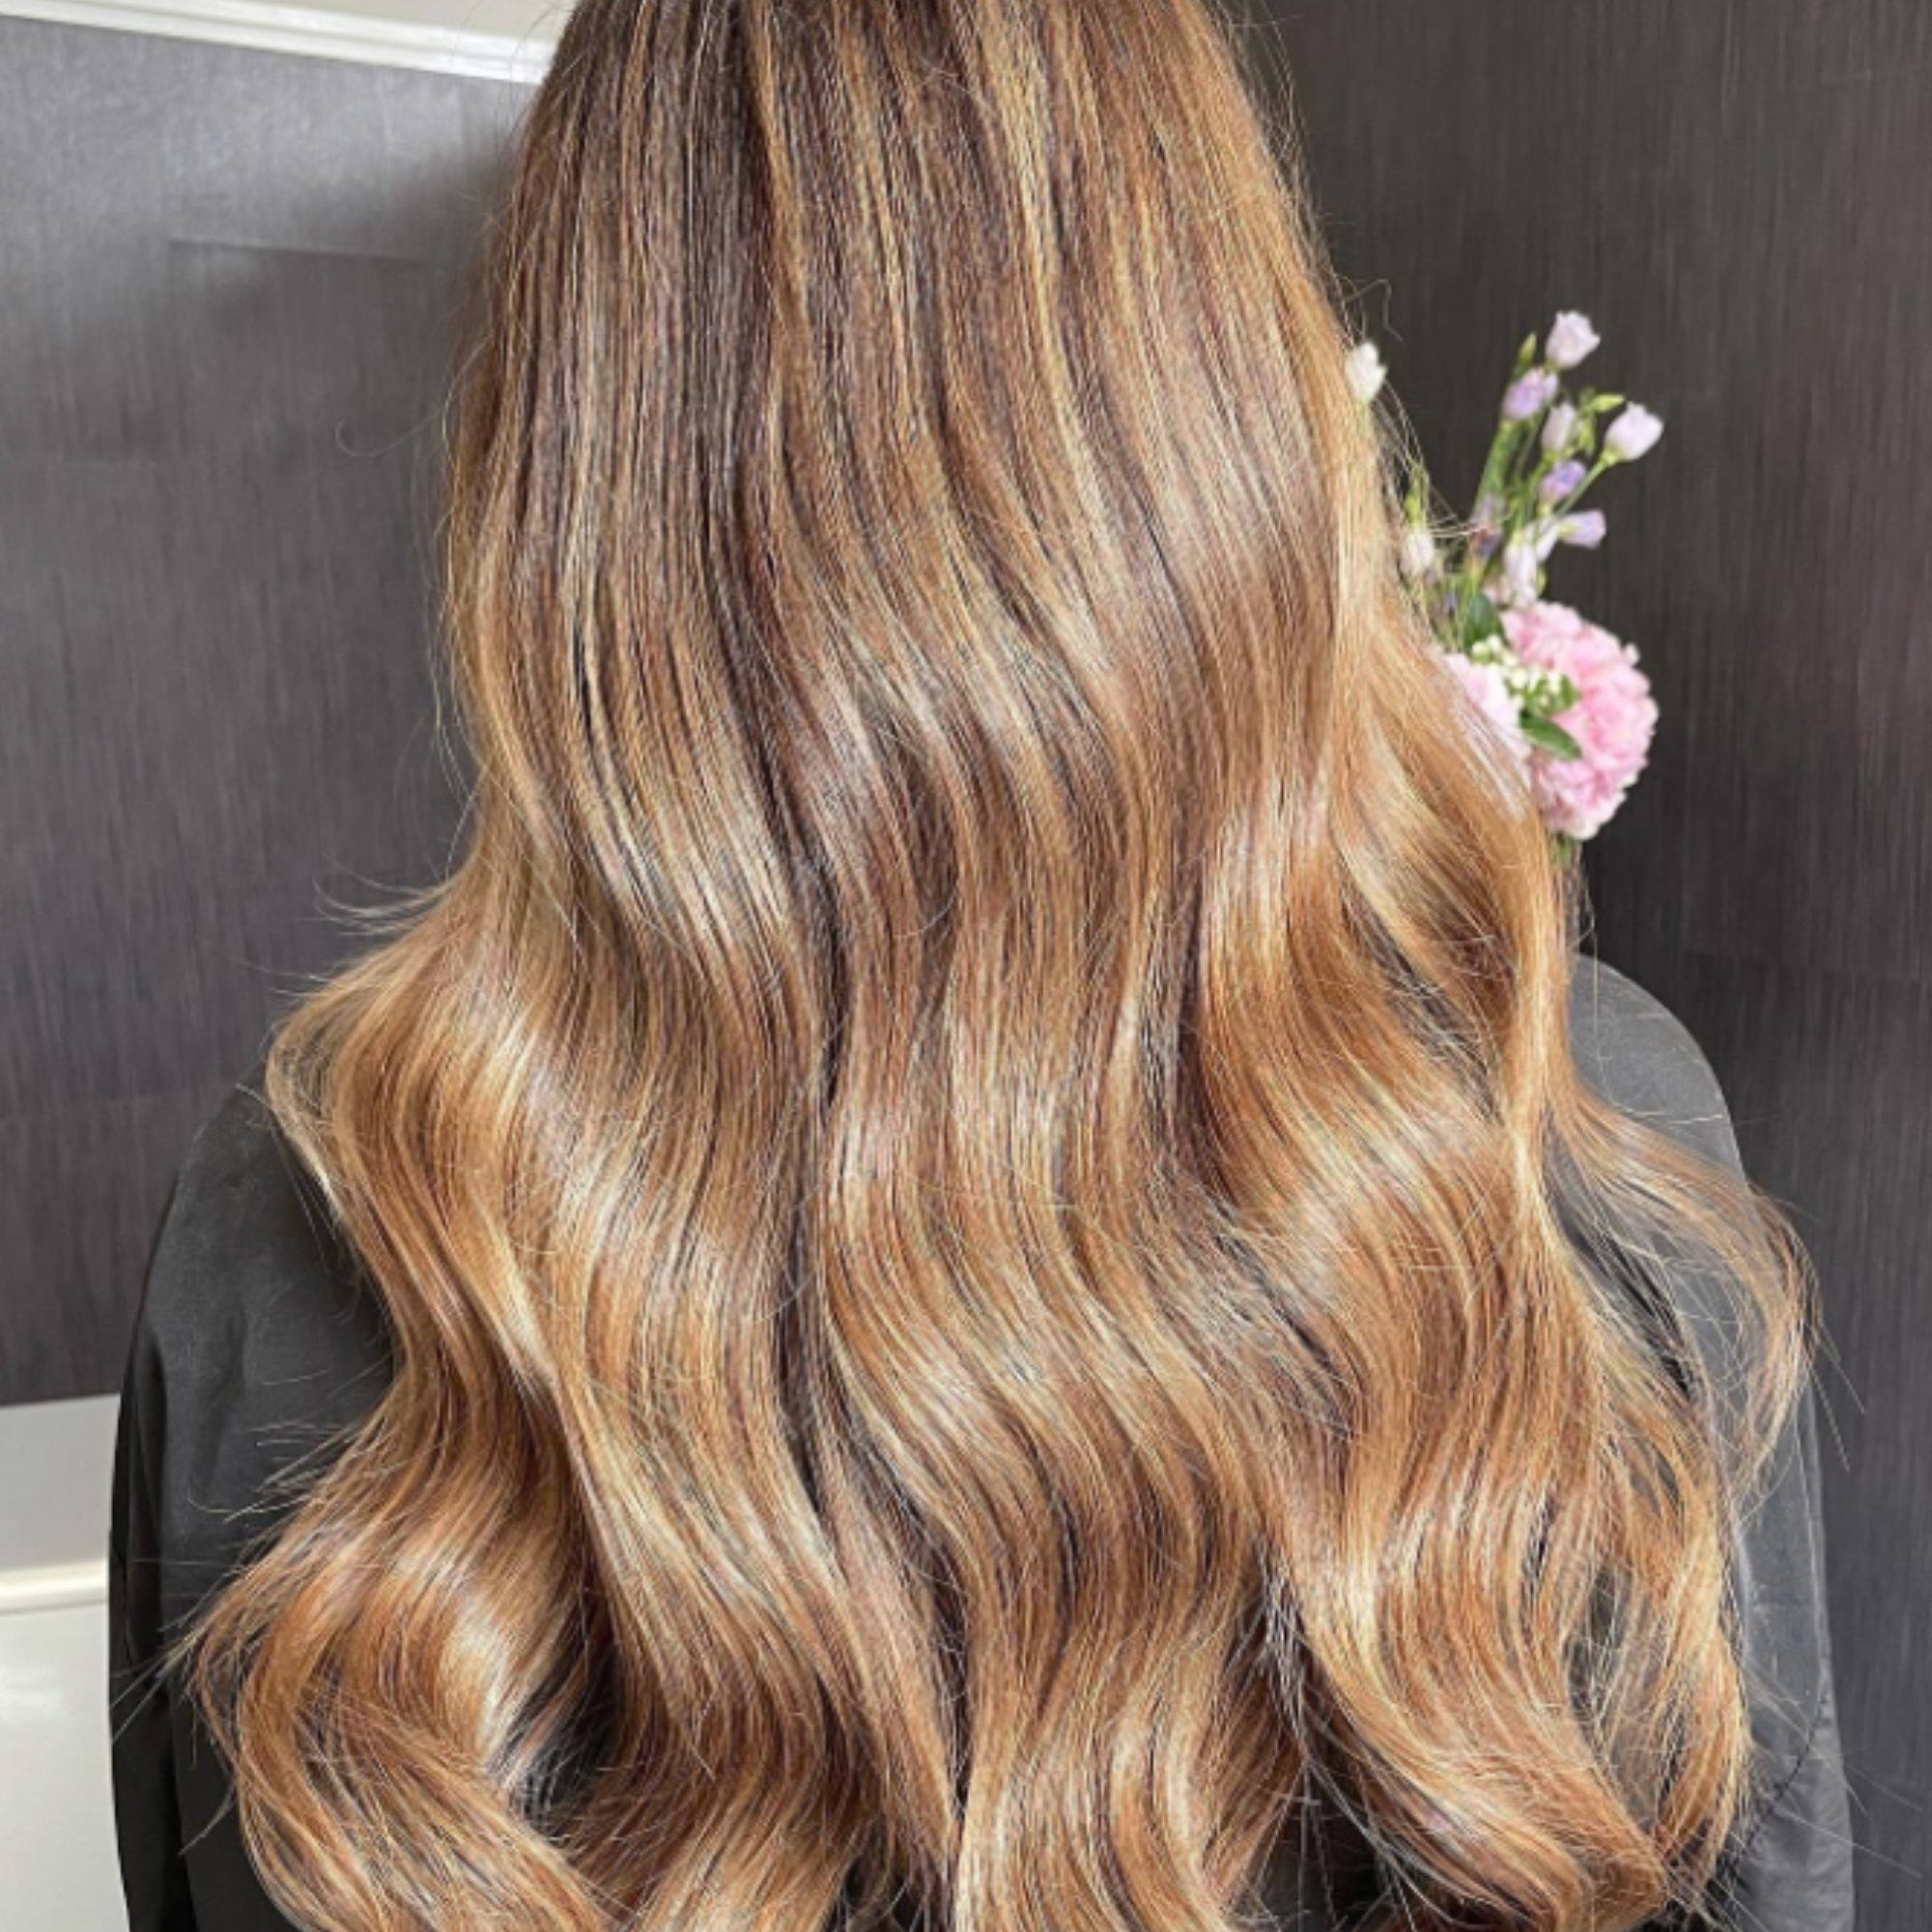 "hair rehab london 18" weft hair extensions shade swatch titled rooted bronze"